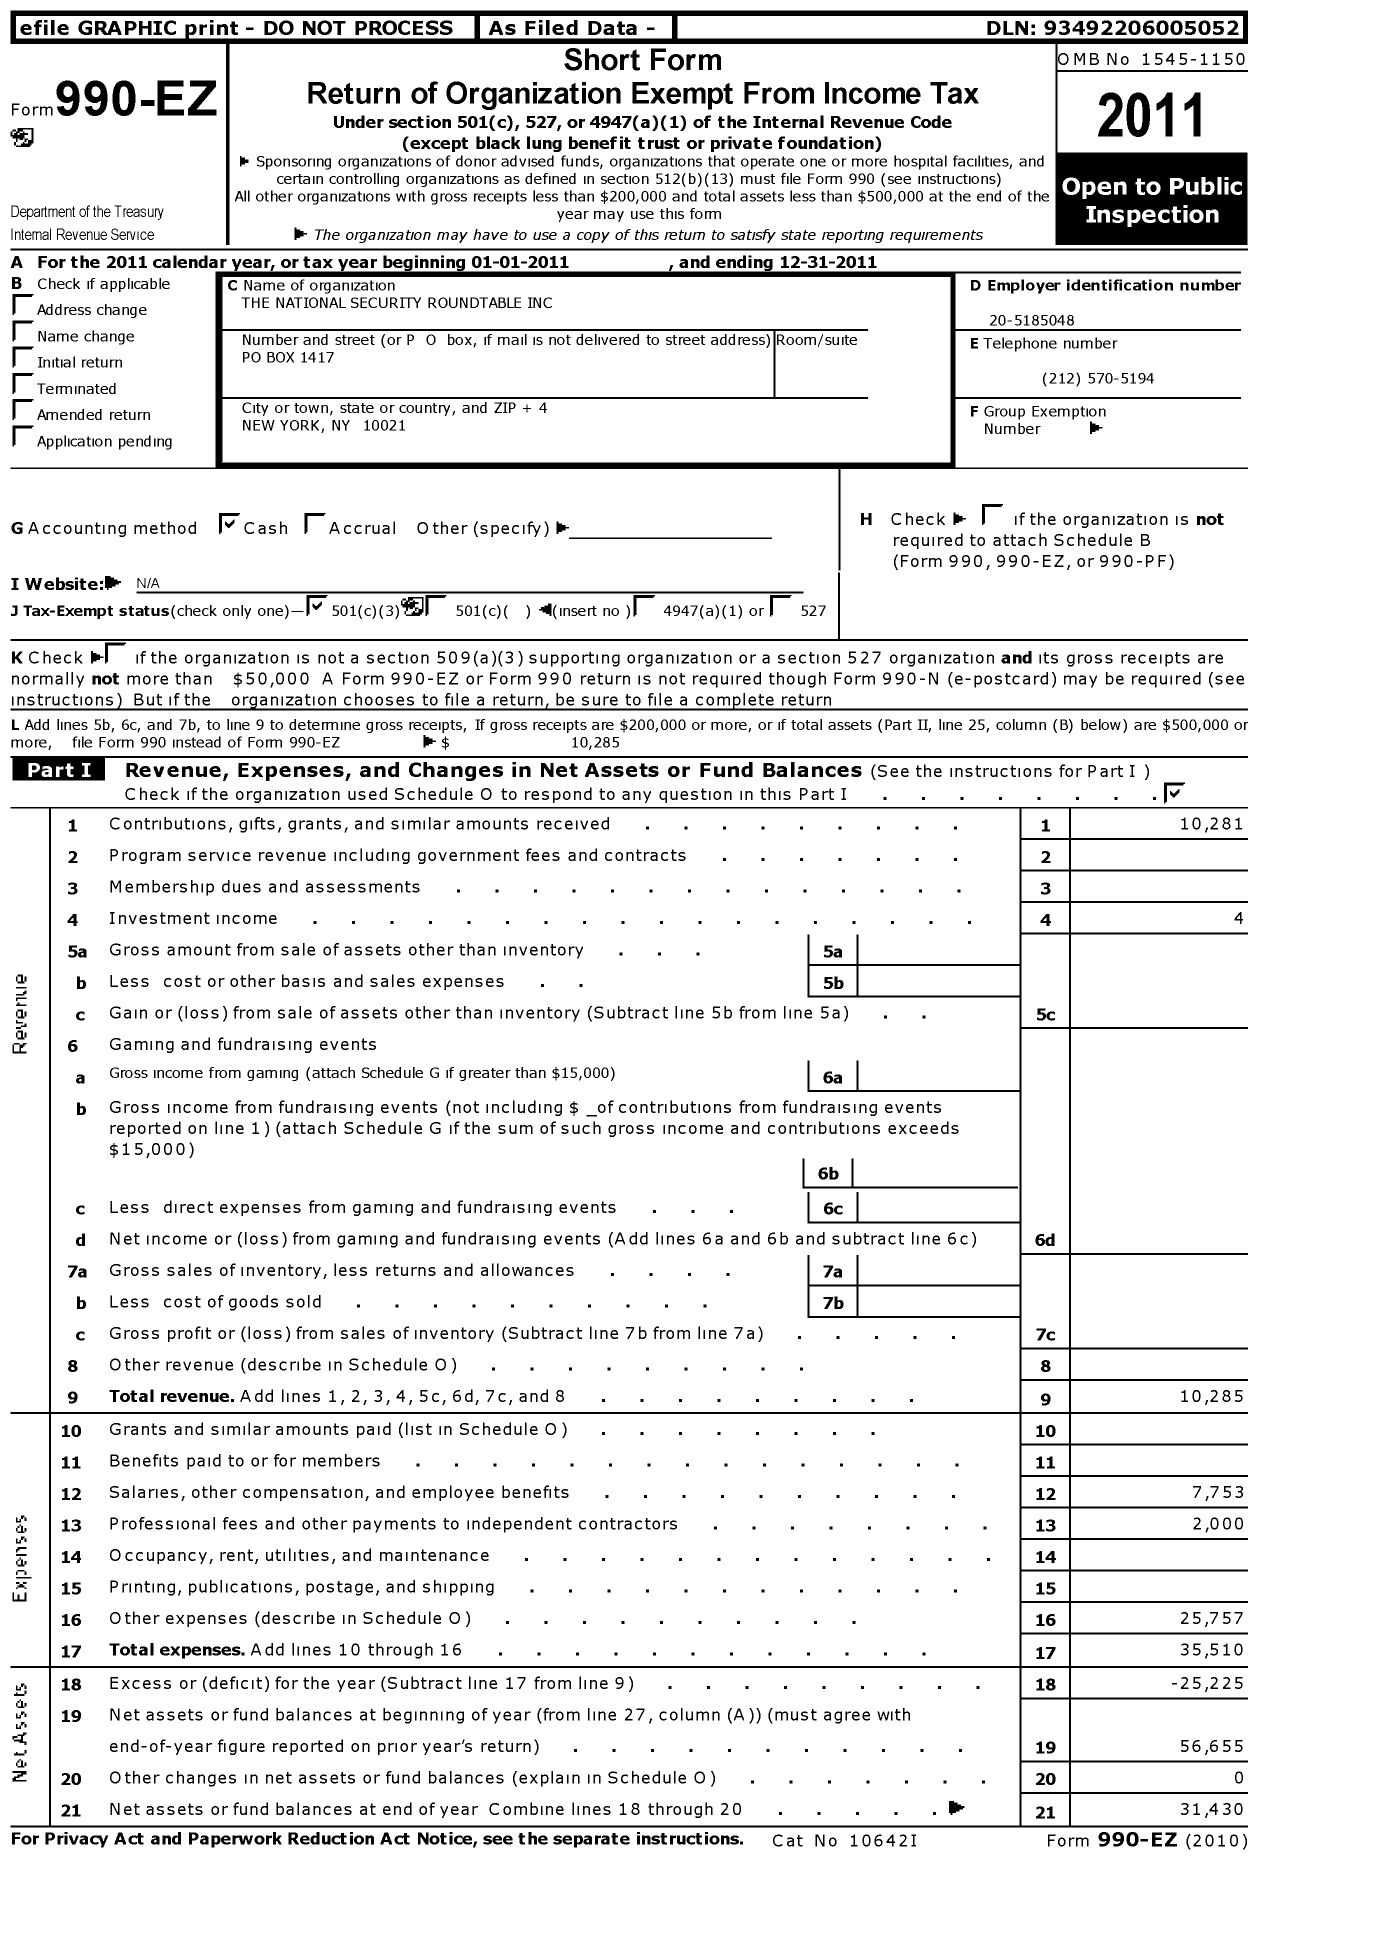 Image of first page of 2011 Form 990EZ for National Security Roundtable